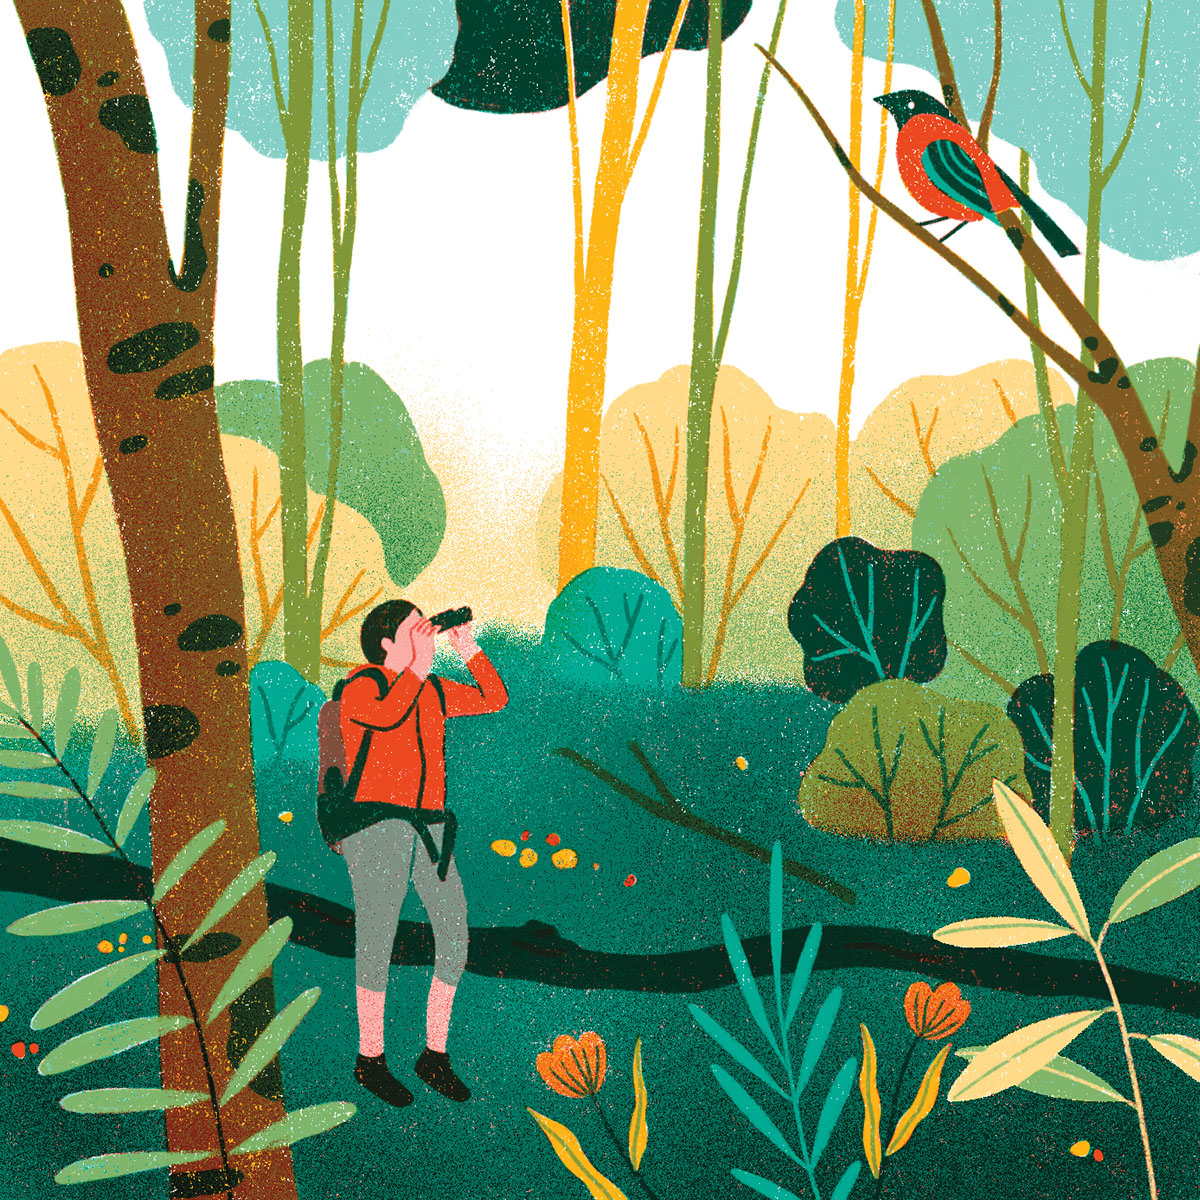 An illustration of a person using binoculars to look at a bird